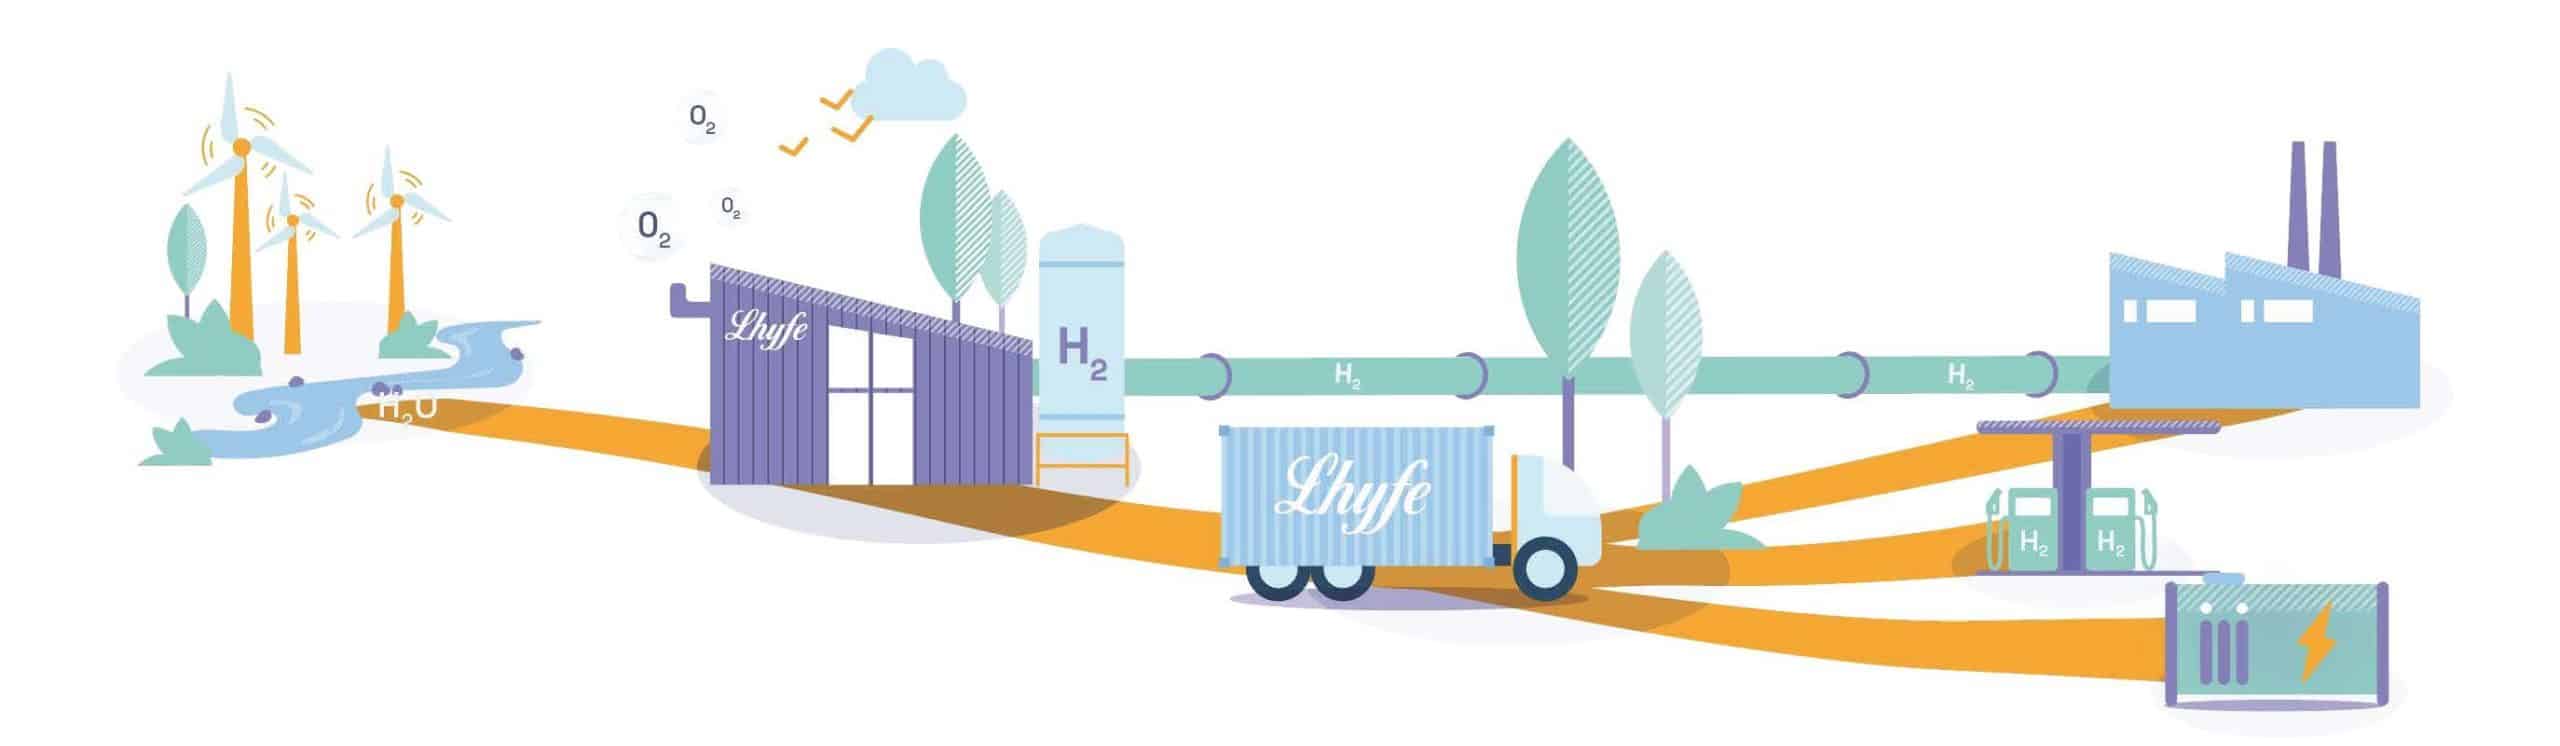 Green hydrogen is a type of hydrogen that emits no CO2 during its production or when used. Green hydrogen is produced using entirely renewable energy sources like wind or solar power, unlike other types of hydrogen such as grey or blue, which are typically produced from fossil fuels. Green hydrogen is considered essential to help meet global energy demand while contributing to climate change goals.